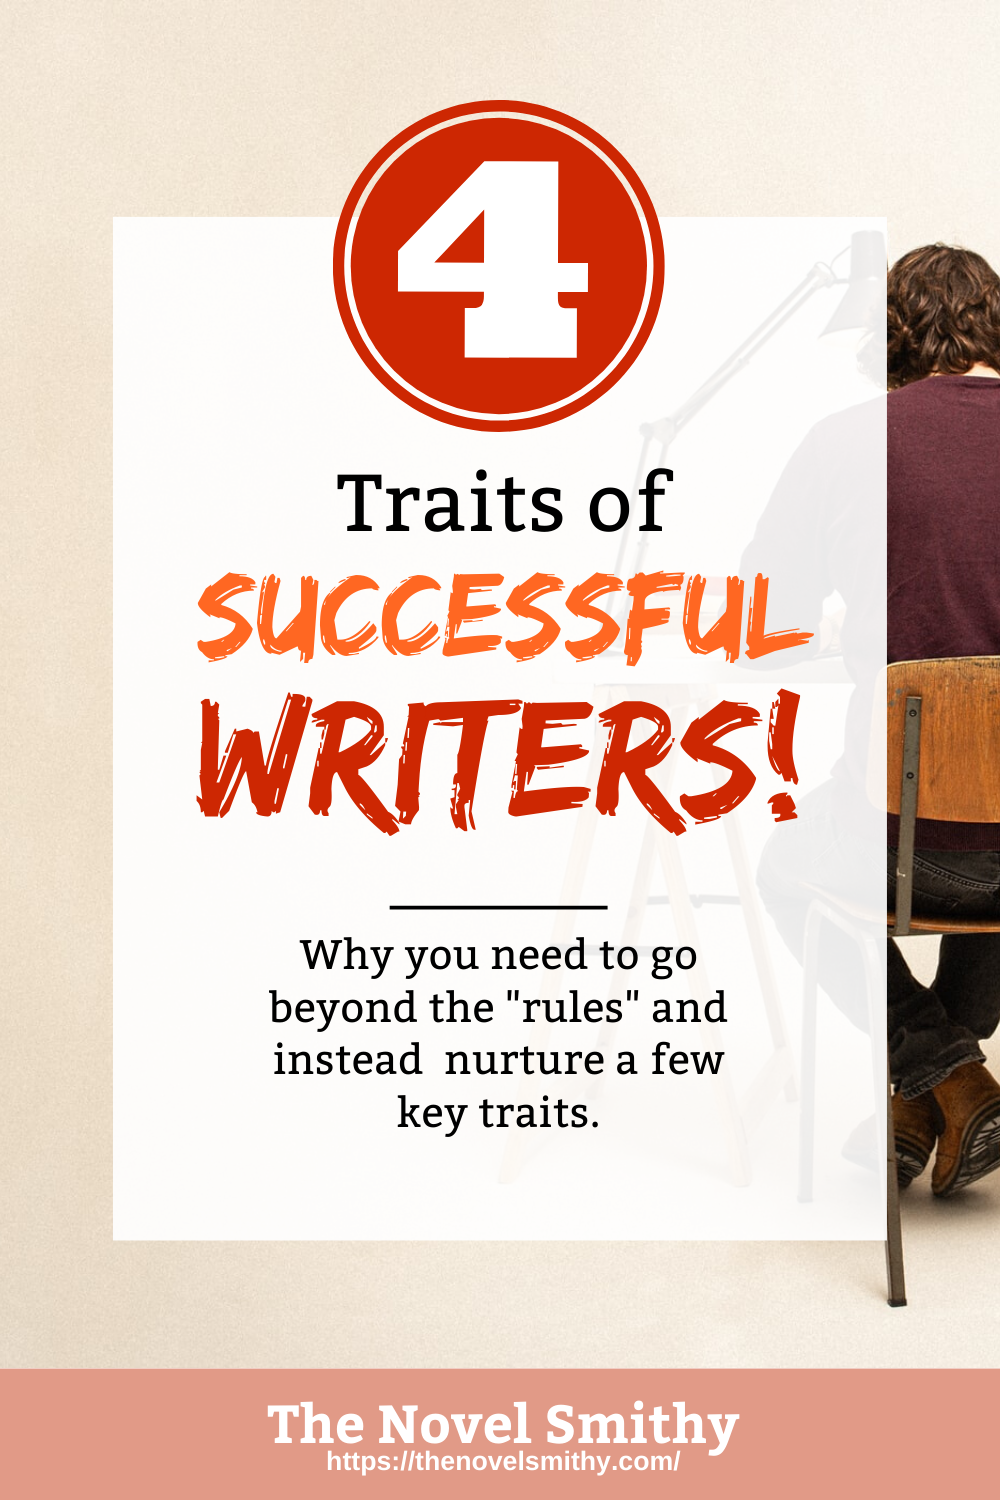 The 4 Traits of a Successful Writer